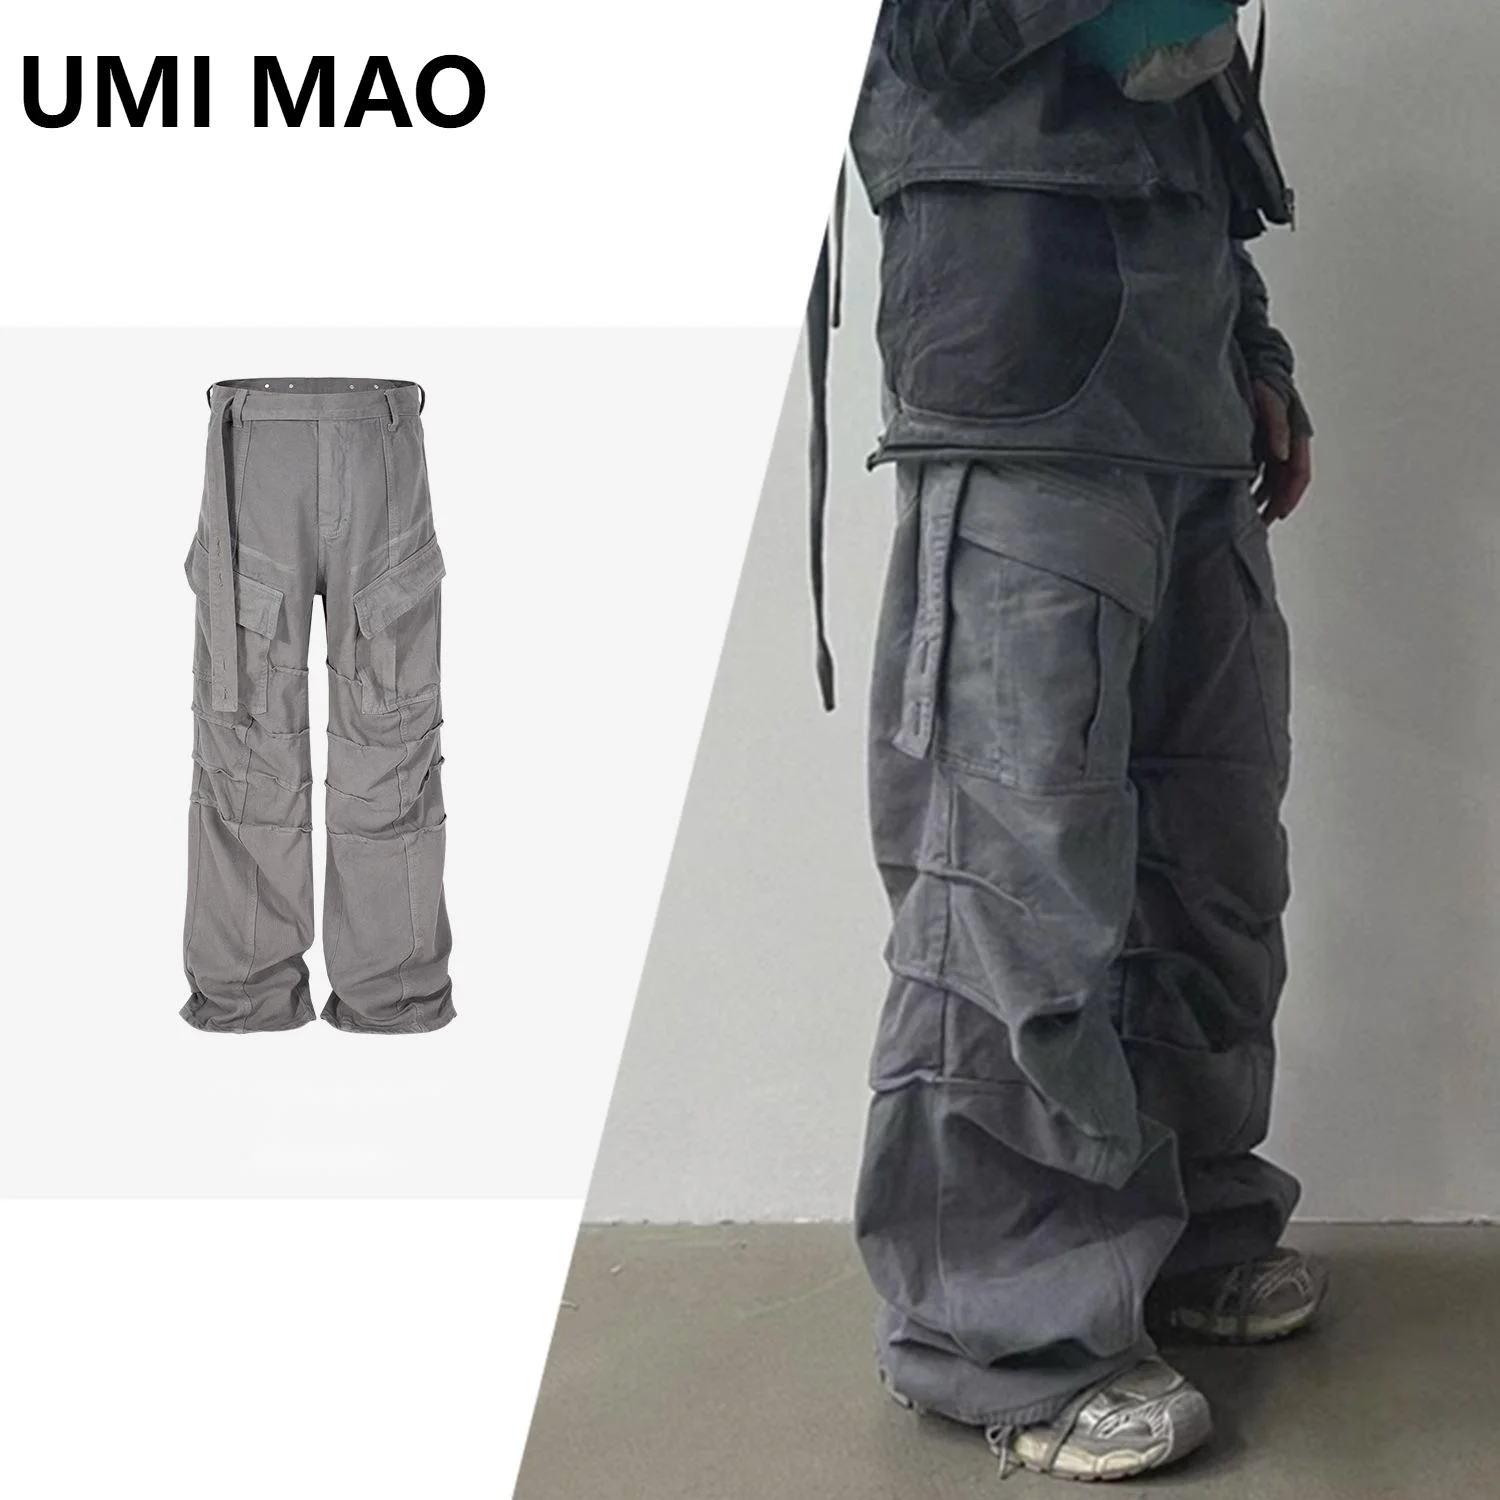 

UMI MAO Men Women Niche Wrinkled Pockets Washed Pleated Buttons Casual Loose Fitting Straight Tube Workwear Vintage Gray Jeans